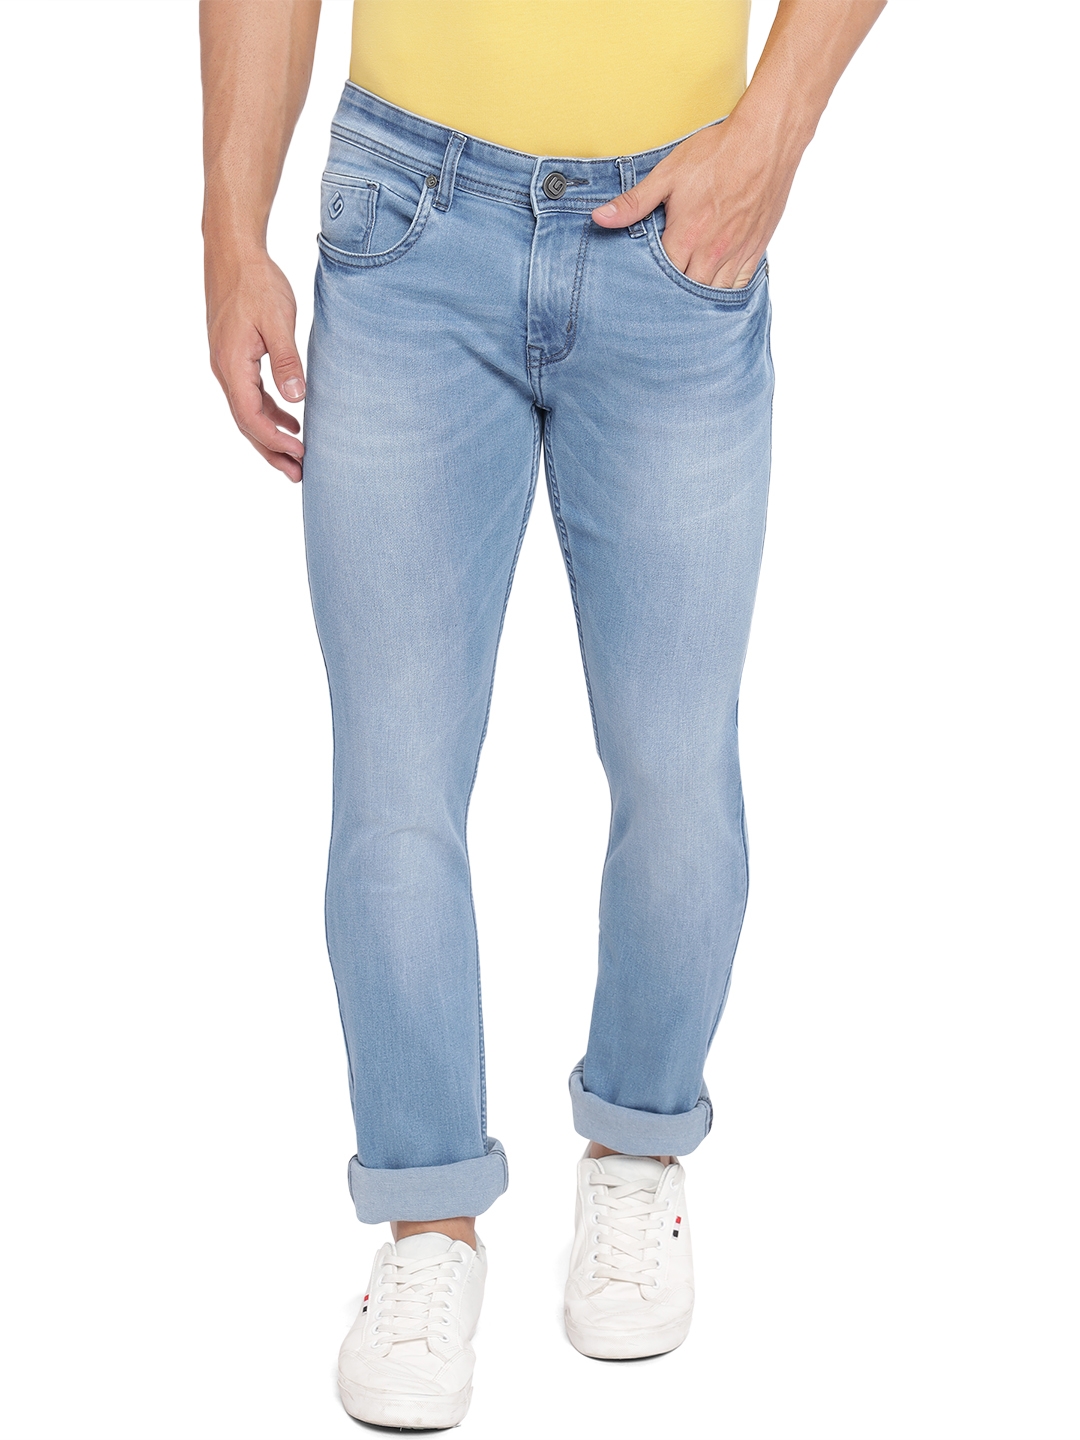 Greenfibre | Bijou Blue Washed Straight Fit Jeans | Greenfibre